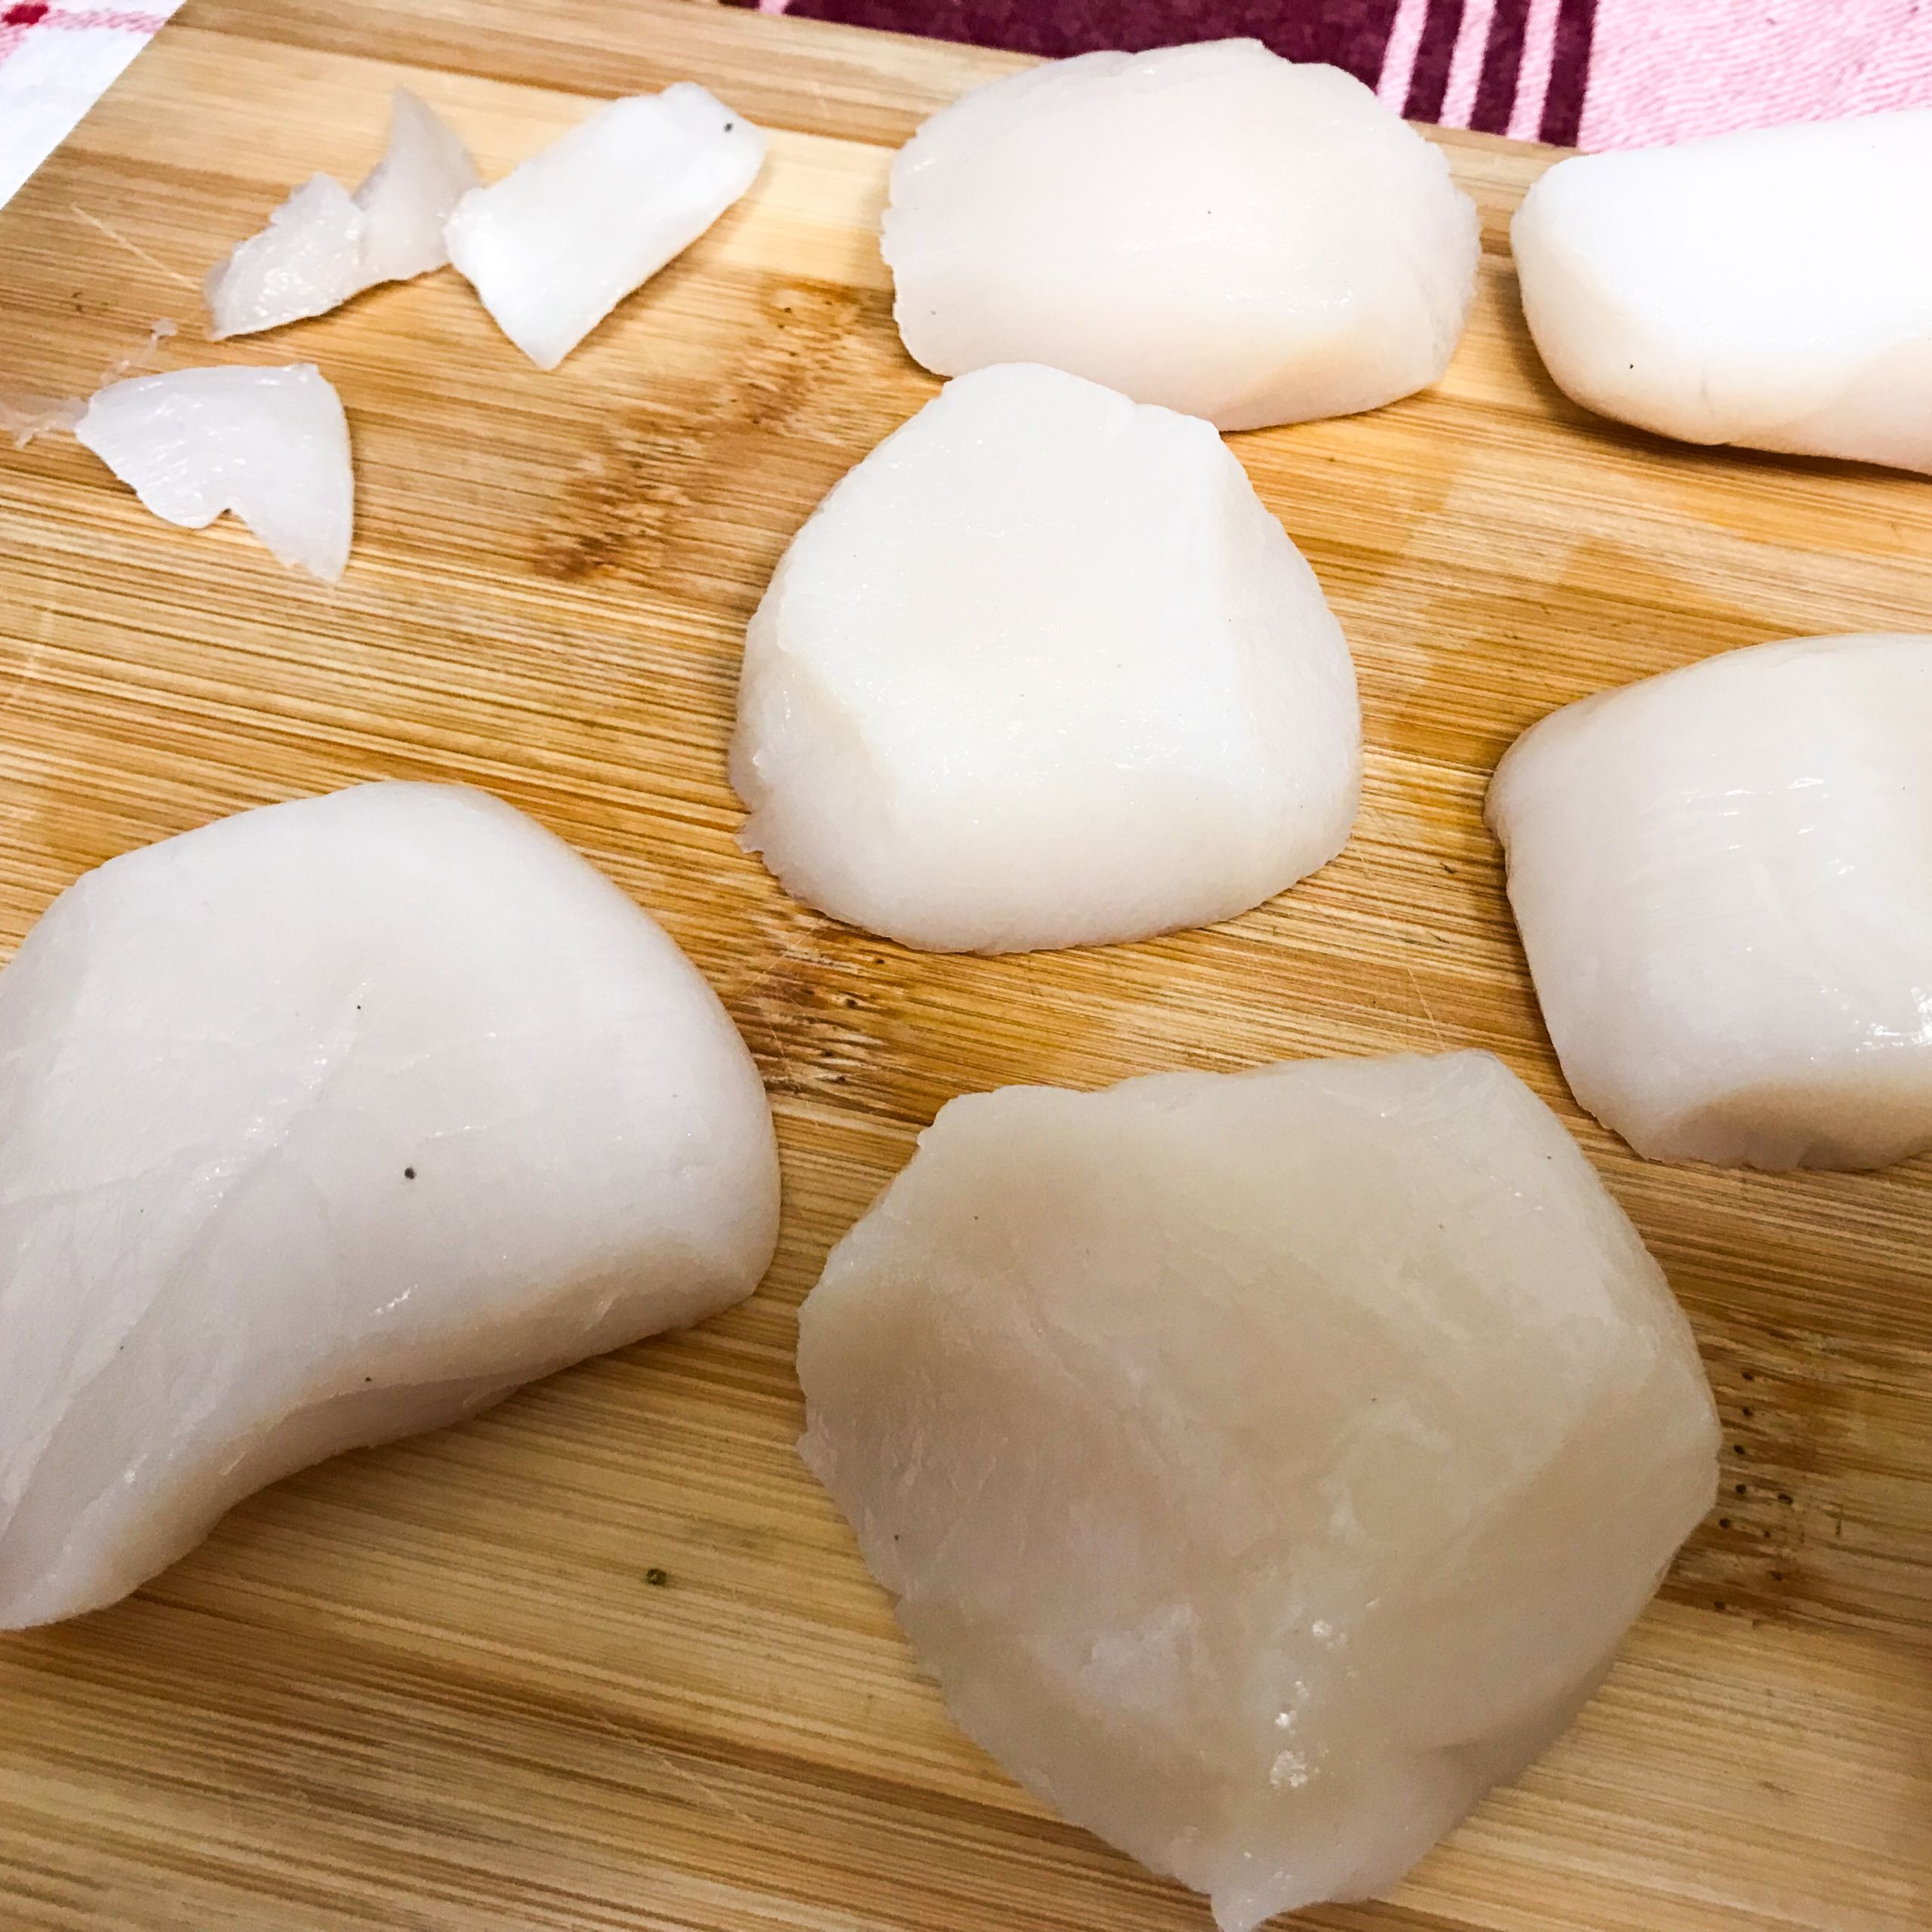 raw scallops and removed abductor muscles.